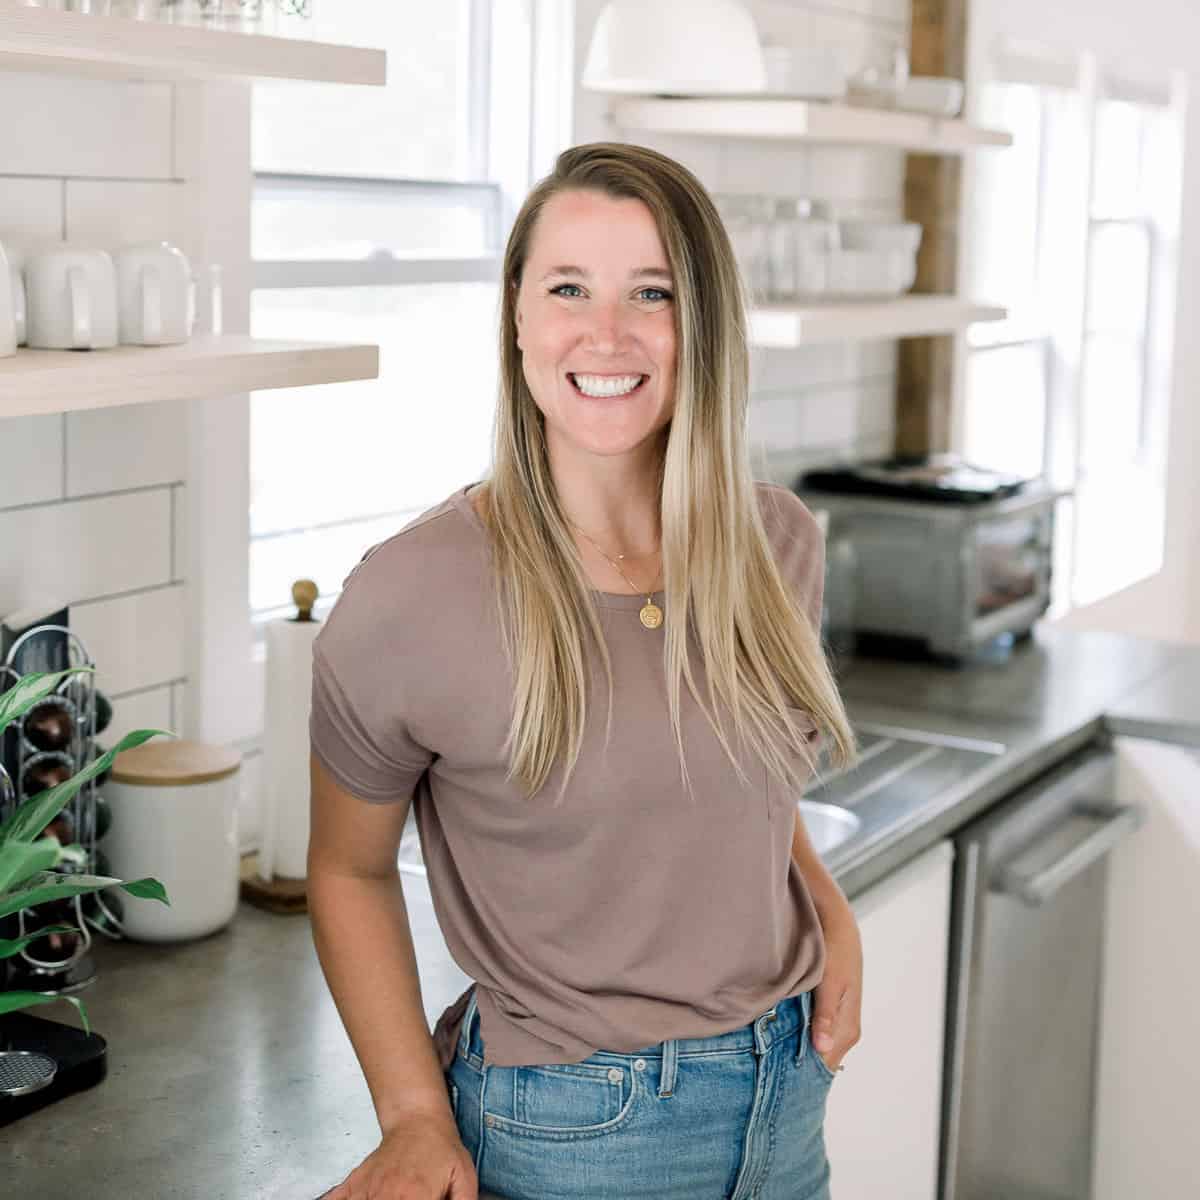 a woman in jeans and a t - shirt standing in a kitchen.